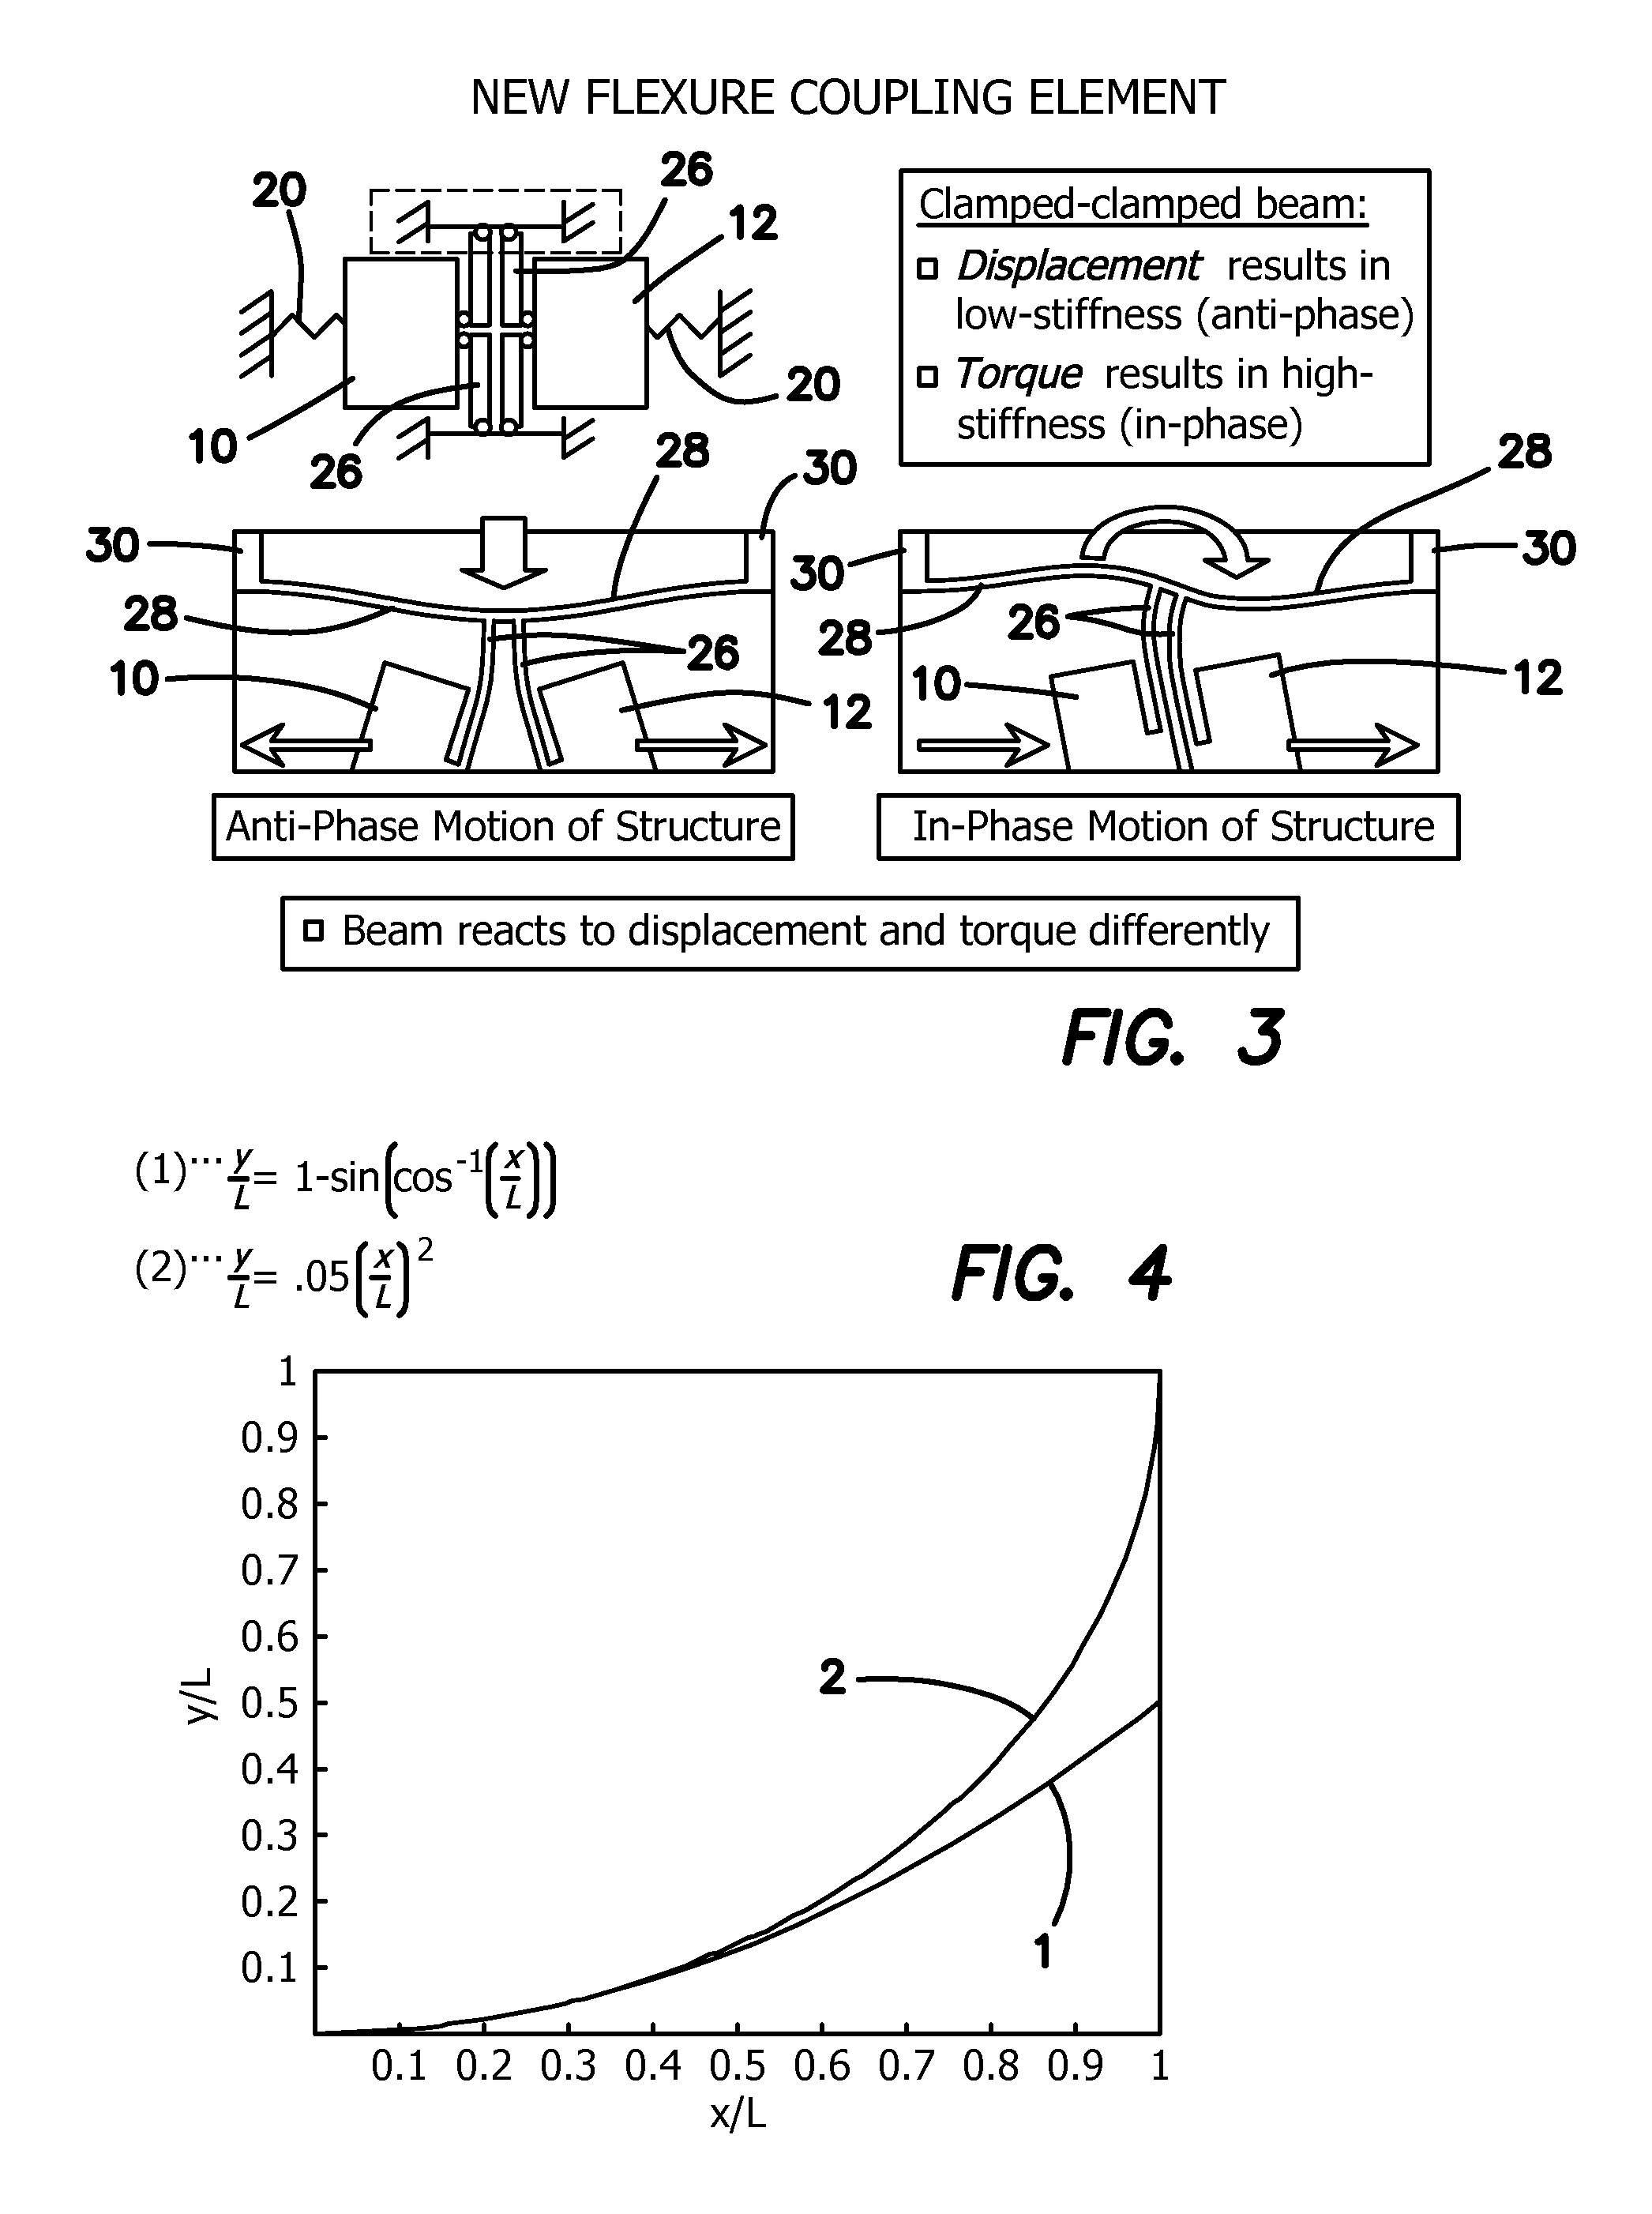 Lever mechanisms for anti-phase mode isolation in MEMS tuning-fork structures